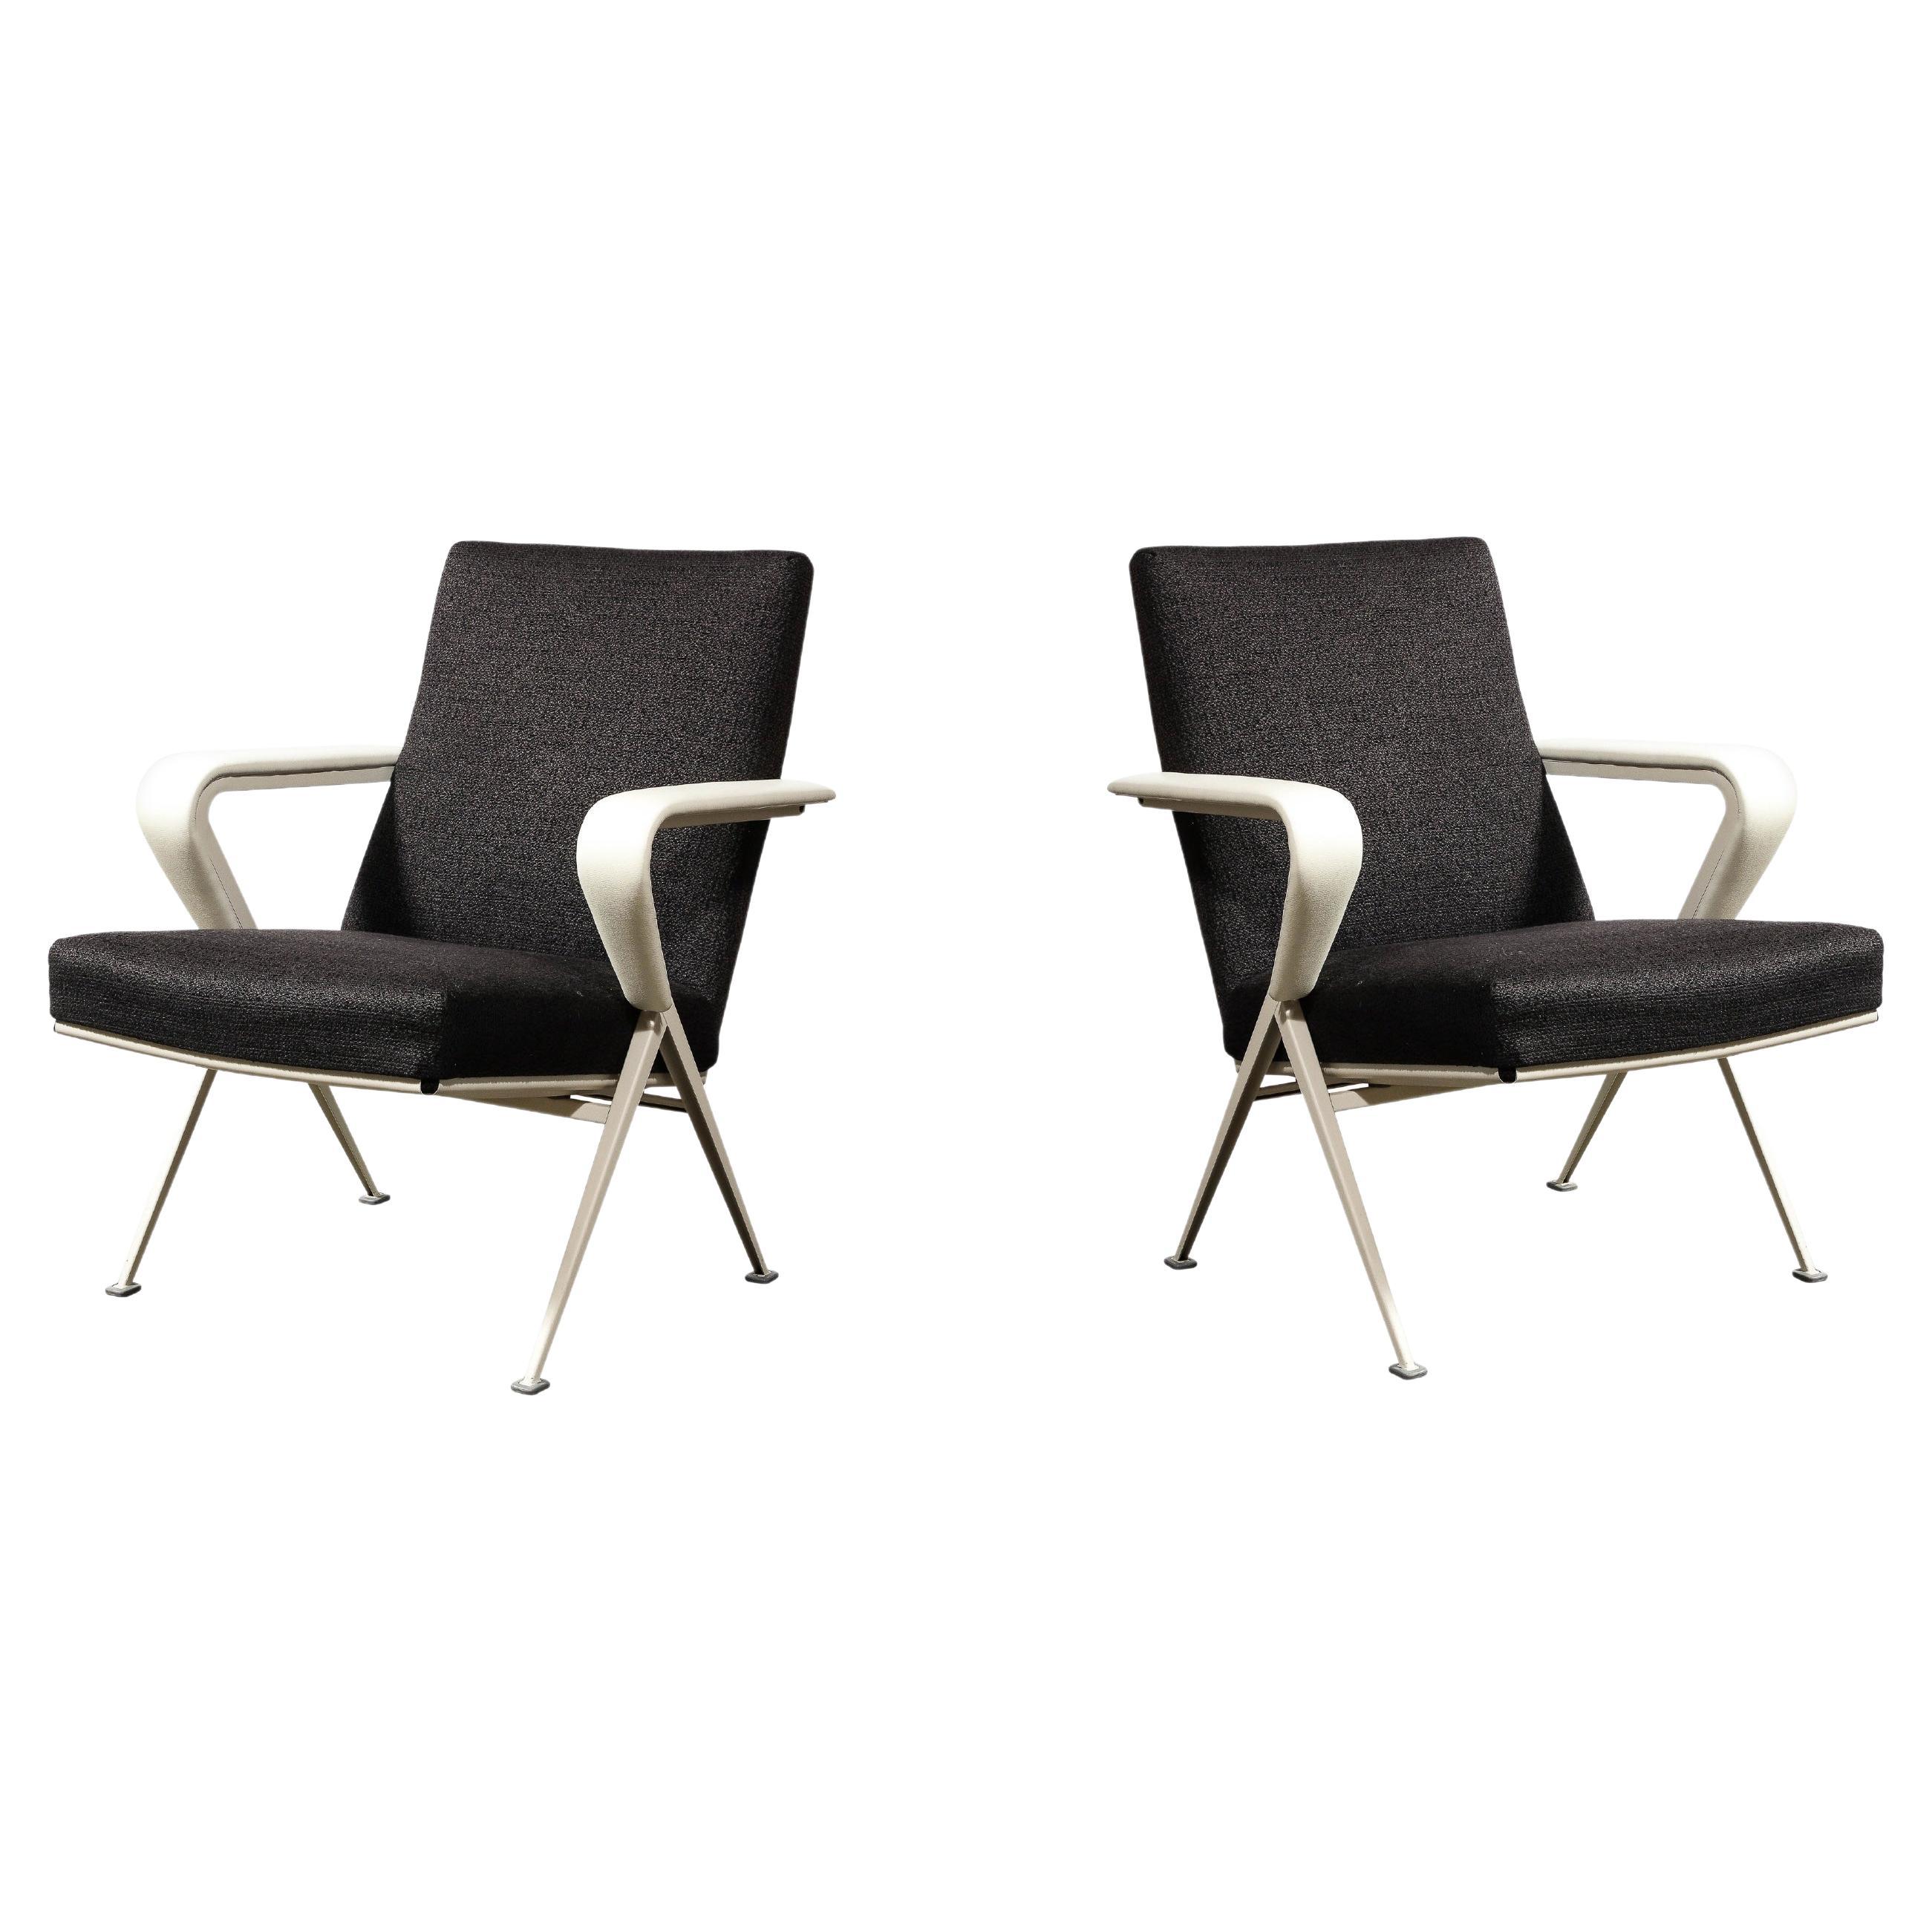 Pair of Repose Chairs in White Leather, Enameled Steel & Charcoal Upholstery For Sale